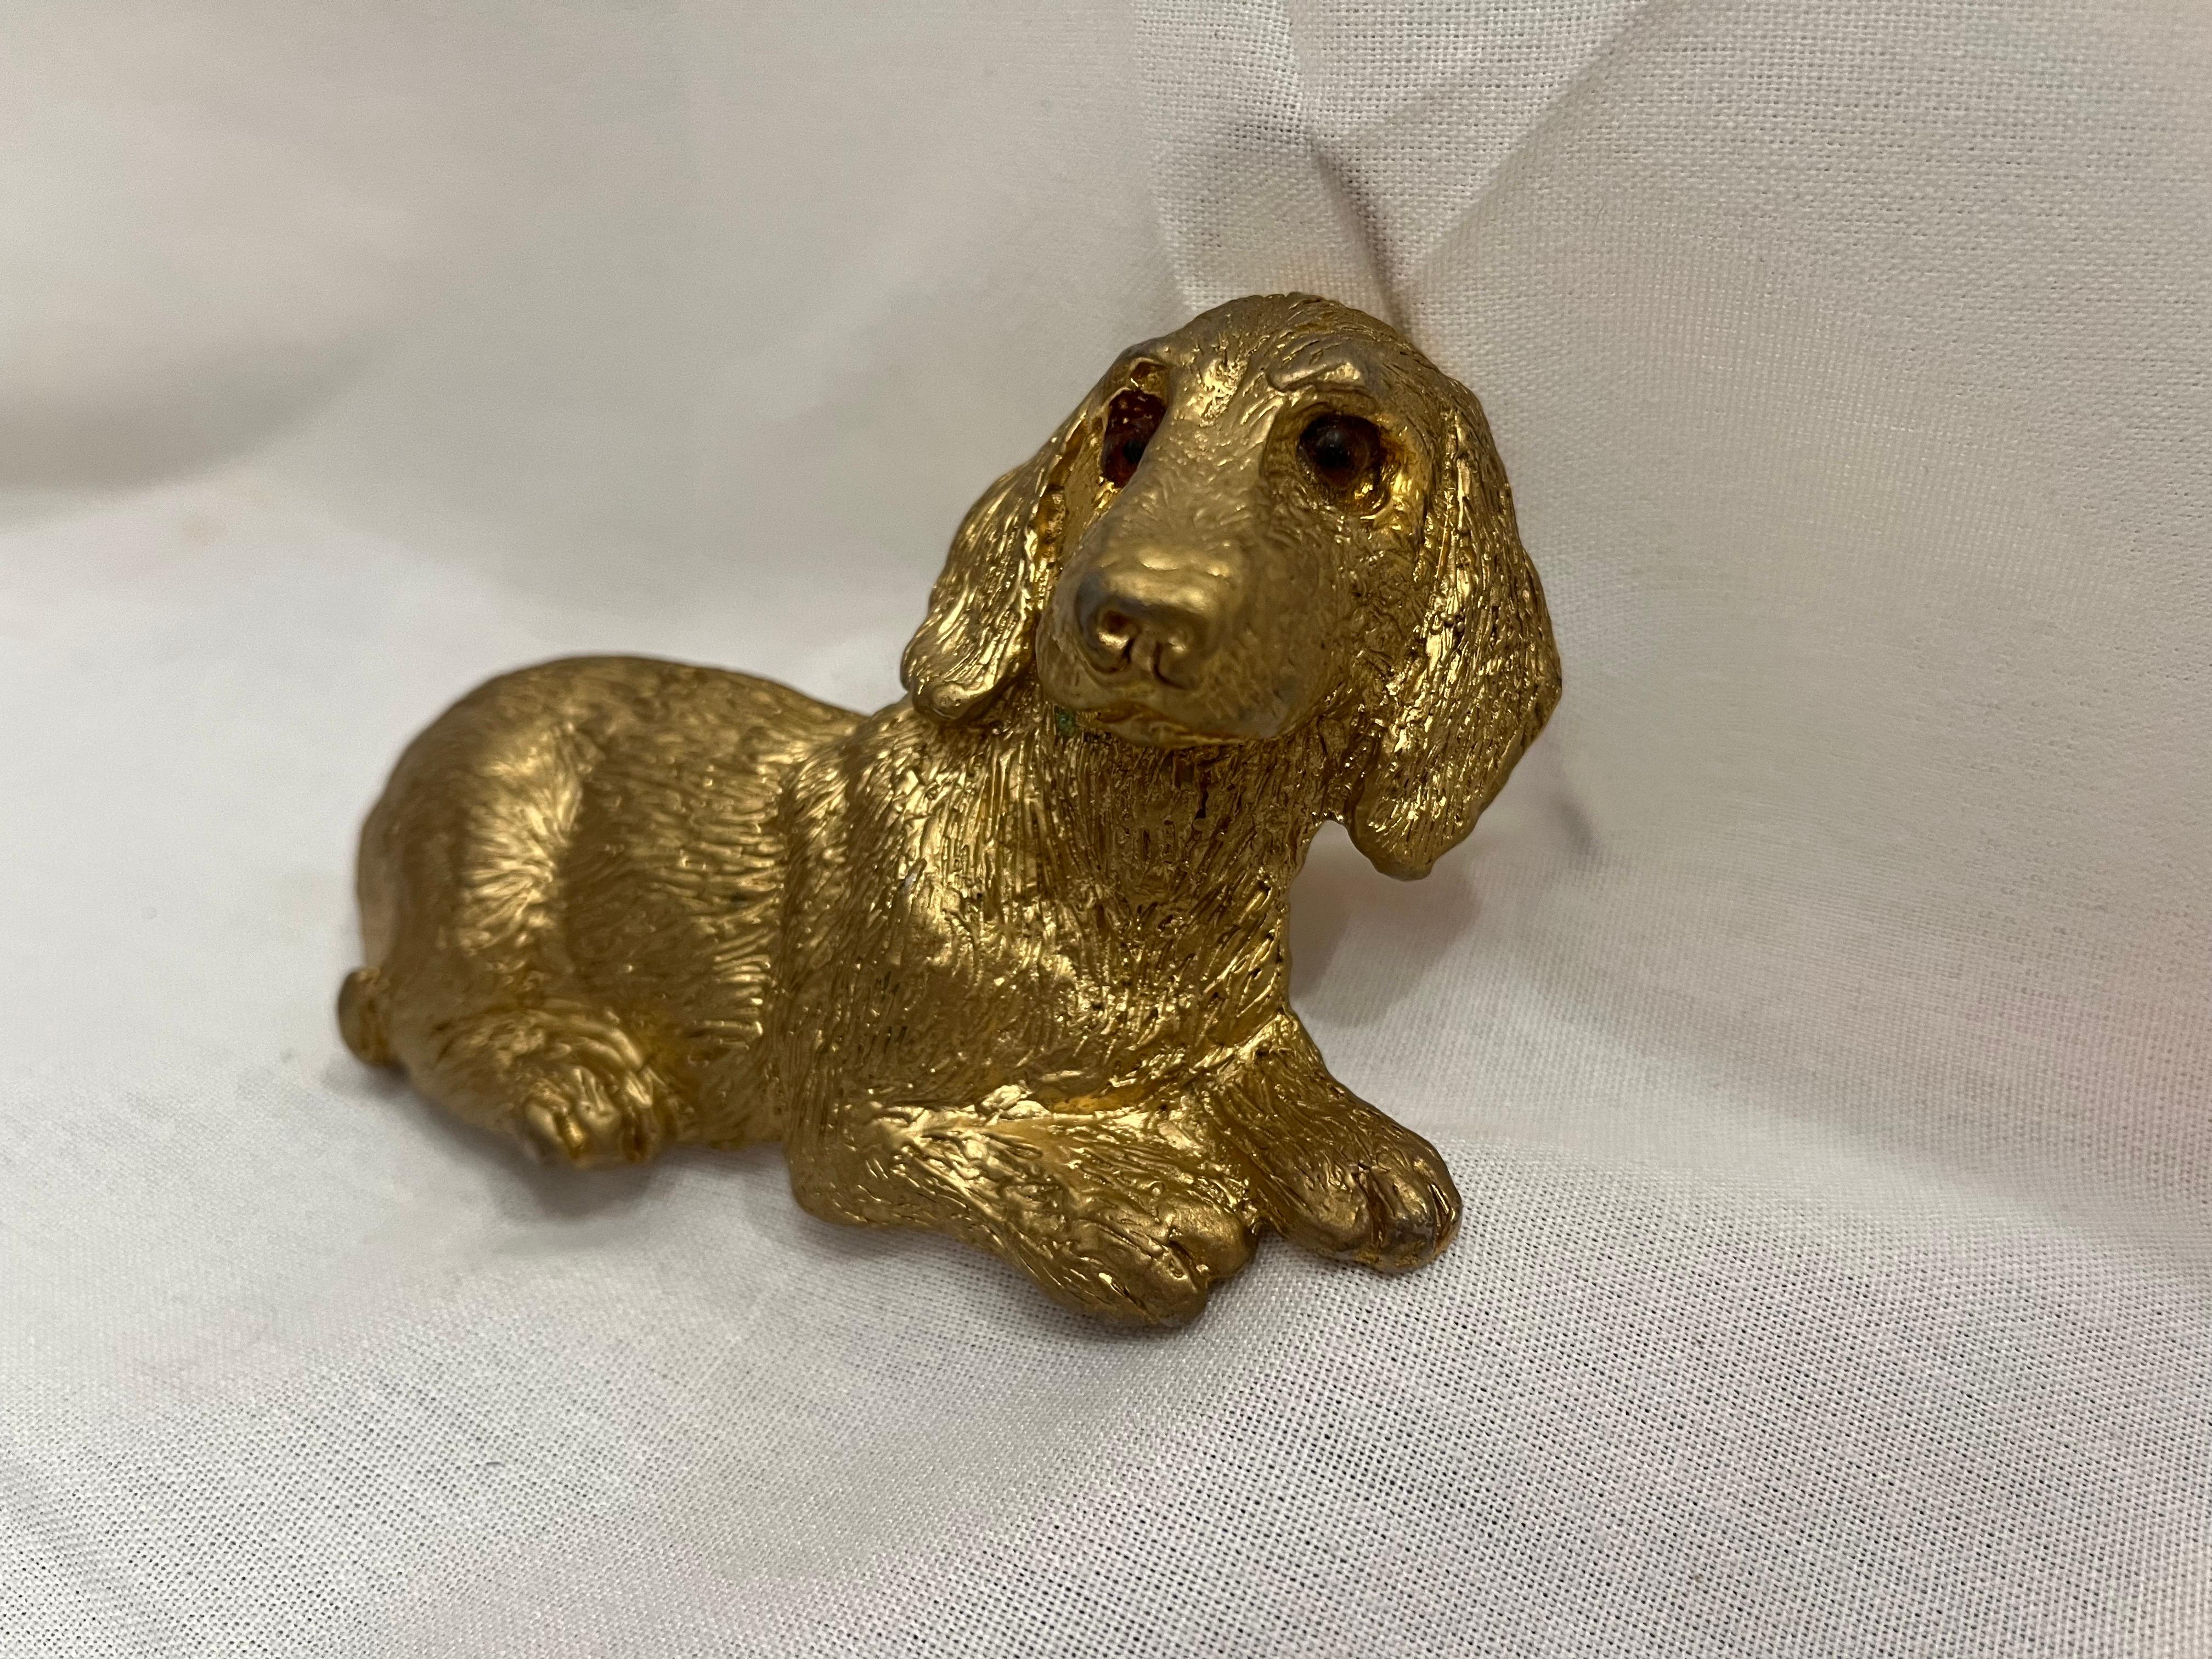 Vintage 1992 Mimi Di Niscemi Signed Golden Dachshund Belt Buckle with Brown Eyes For Sale 3